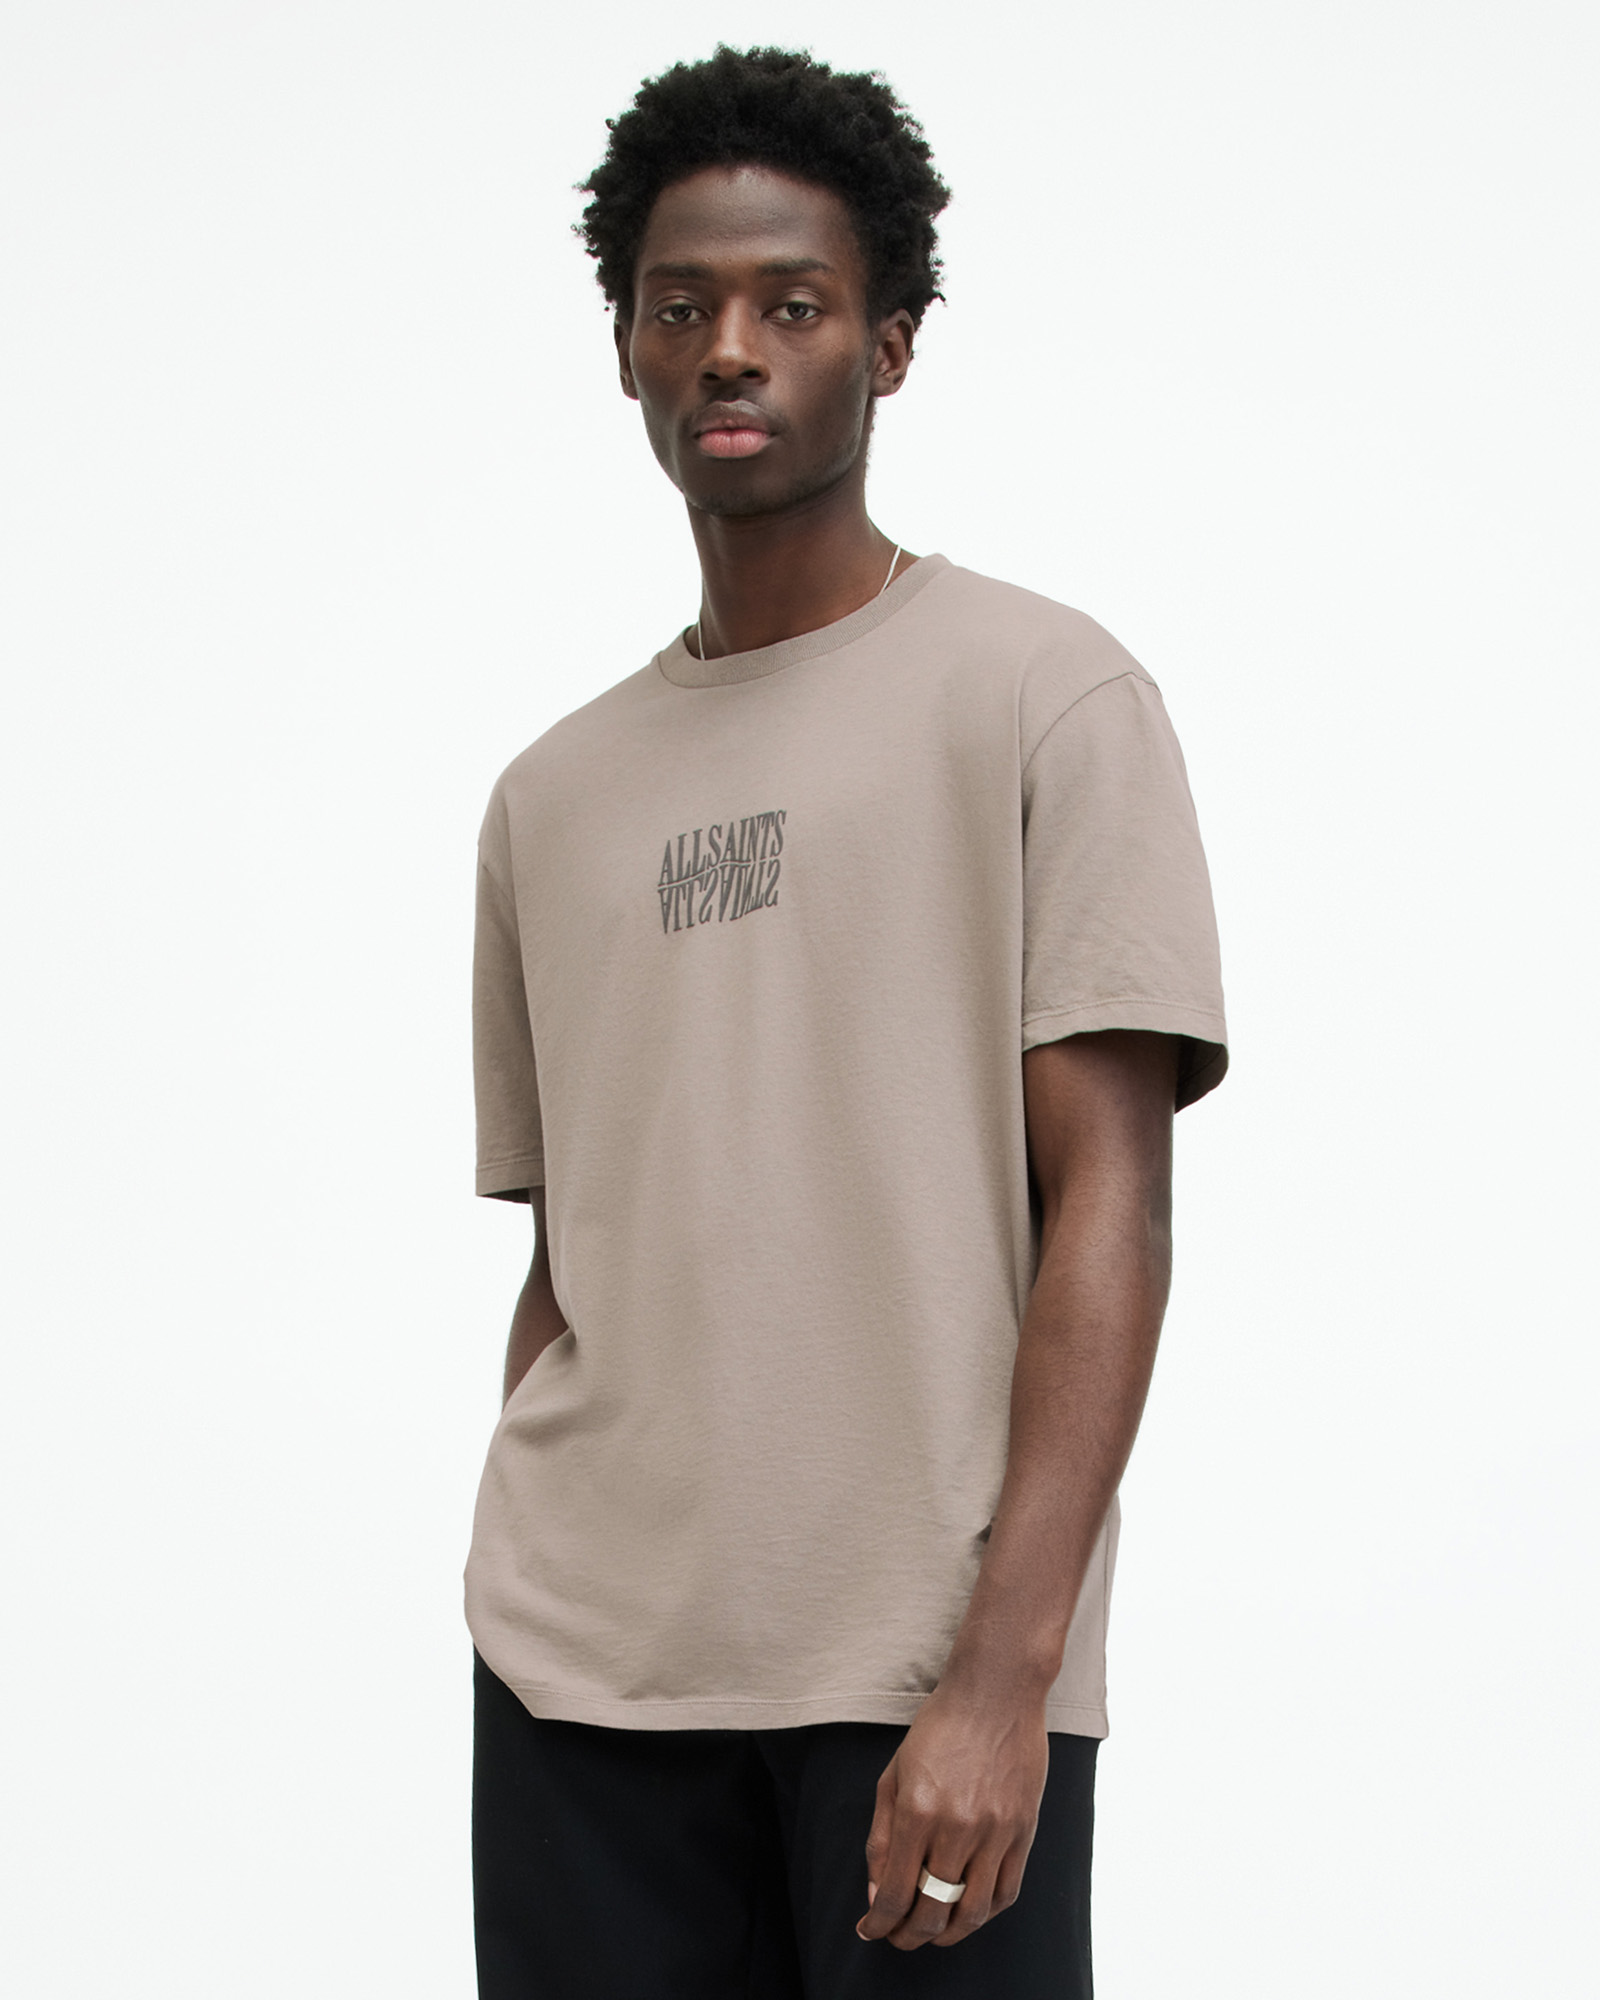 Varden Relaxed Fit Warped Logo T-Shirt ALLSAINTS TAUPE CHESTNUT US 